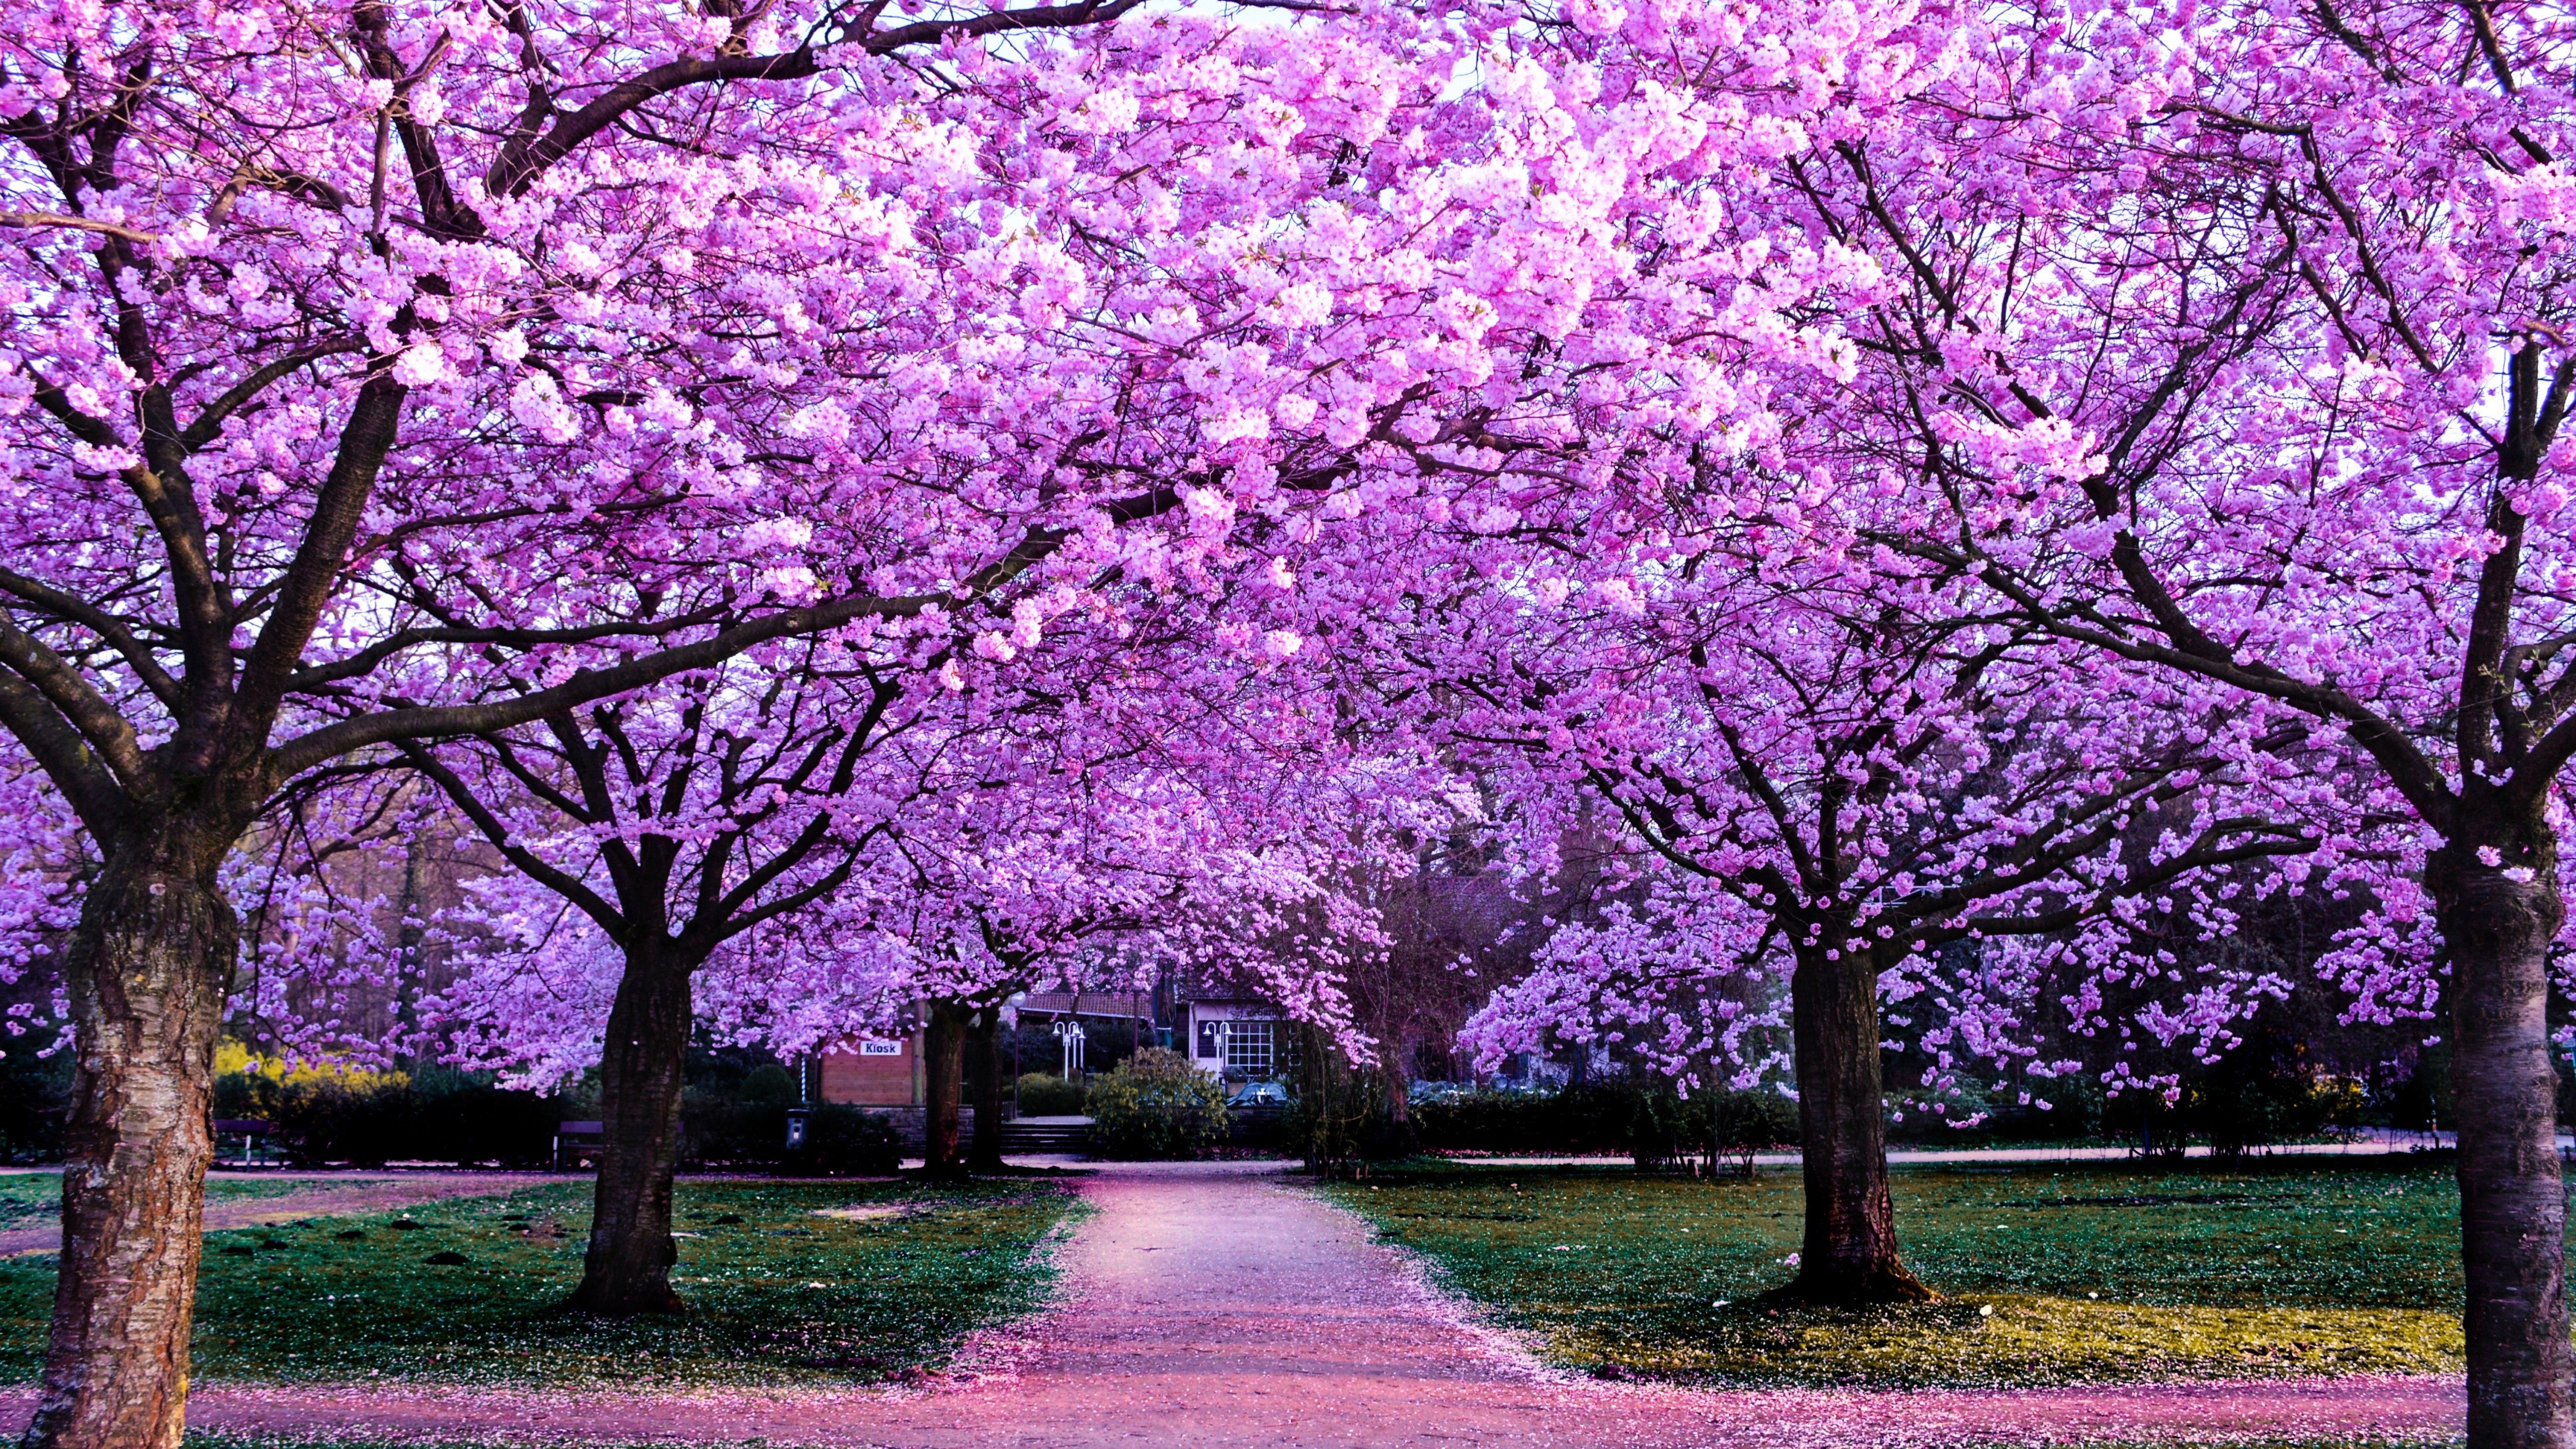 Cherry Blossom Trees 4K Wallpaper, Purple Flowers, Pathway, Park, Floral, Colorful, Spring, Beautiful, Nature